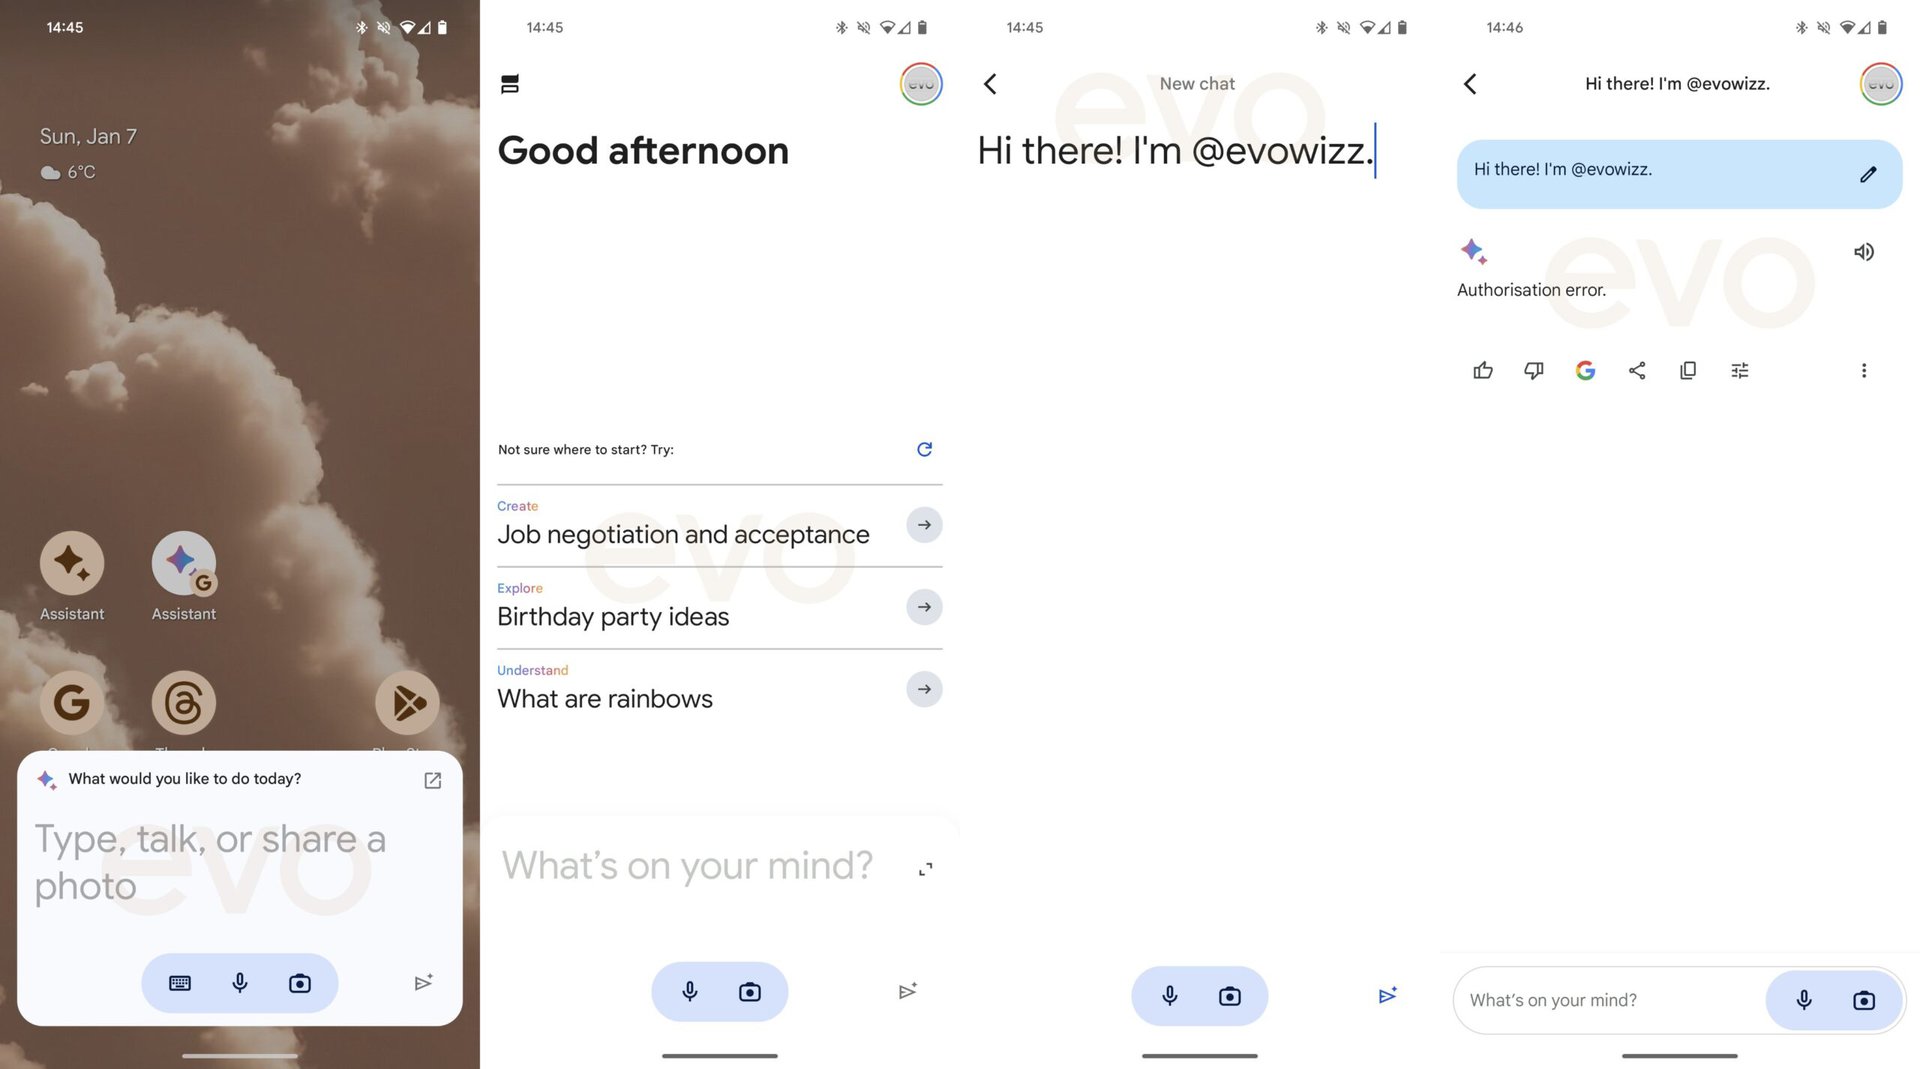 Google Assistant with Bard 2